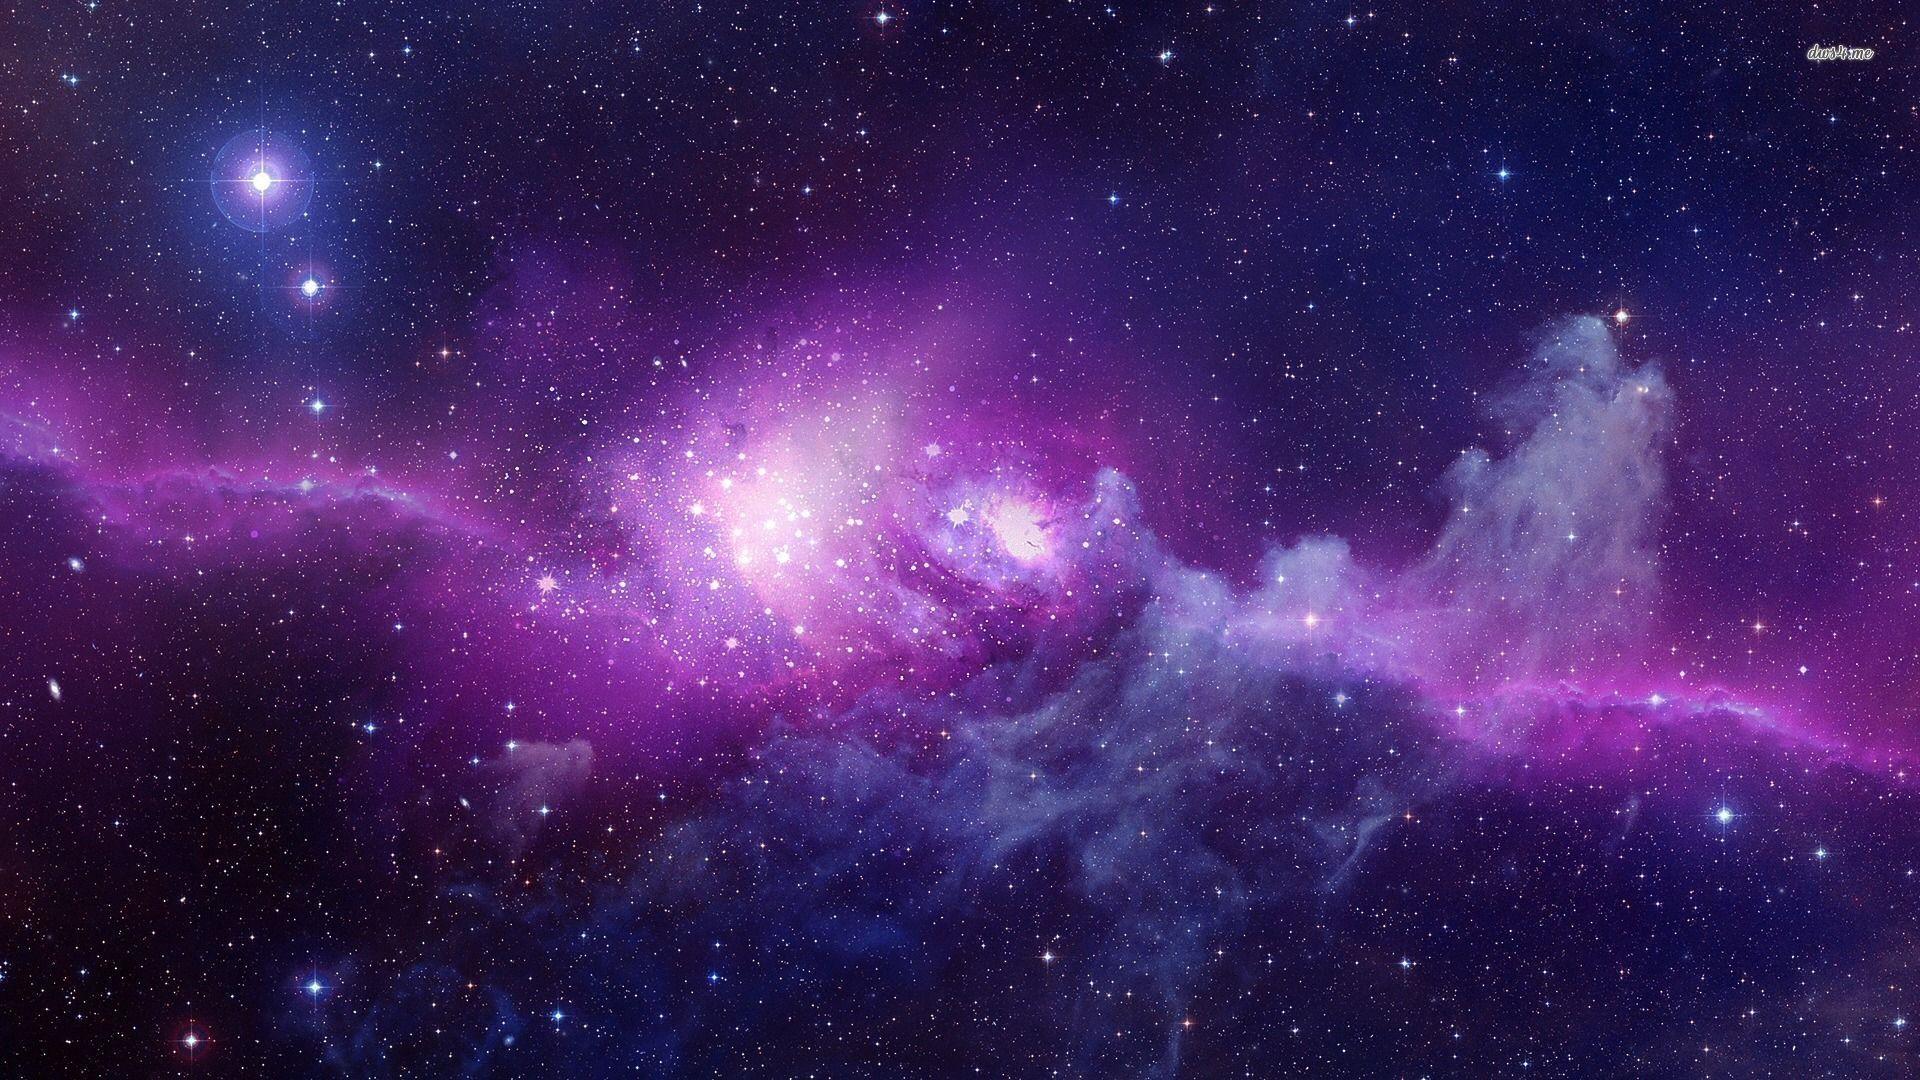 Wallpaper For > Blue And Purple Galaxy Wallpaper